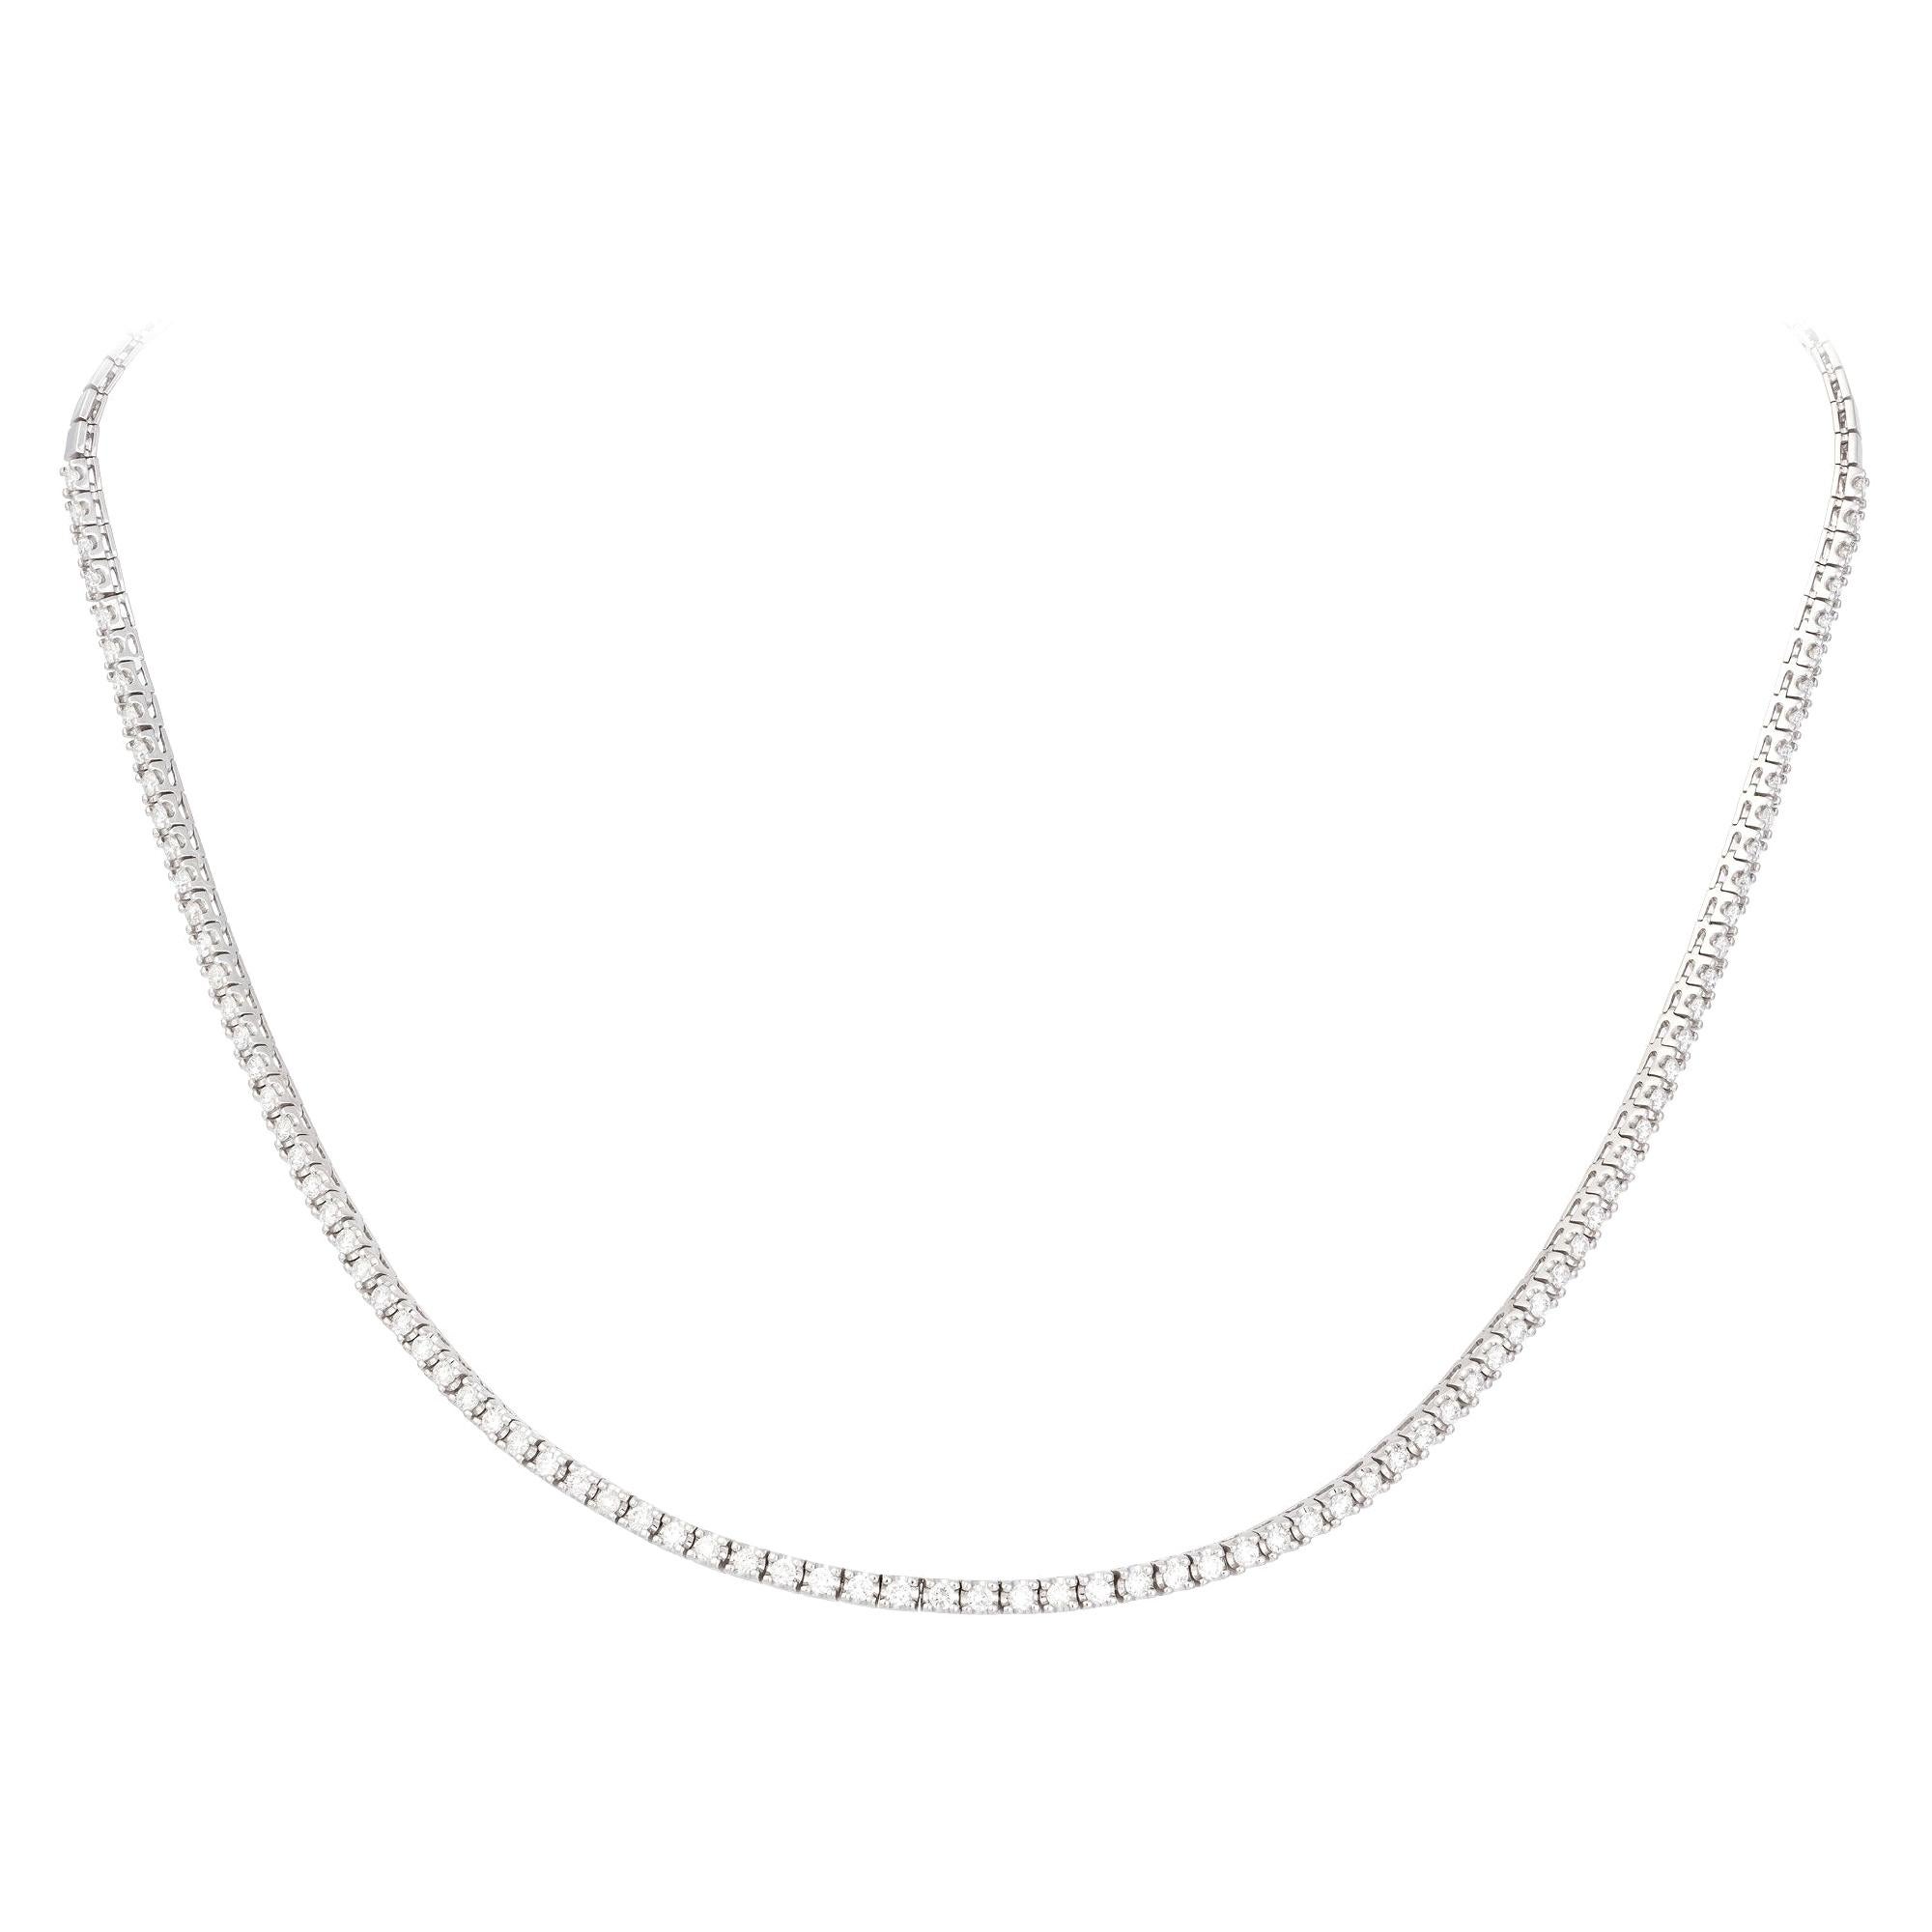 Best Seller Classic Style Diamond Necklace 18k White Gold for Her